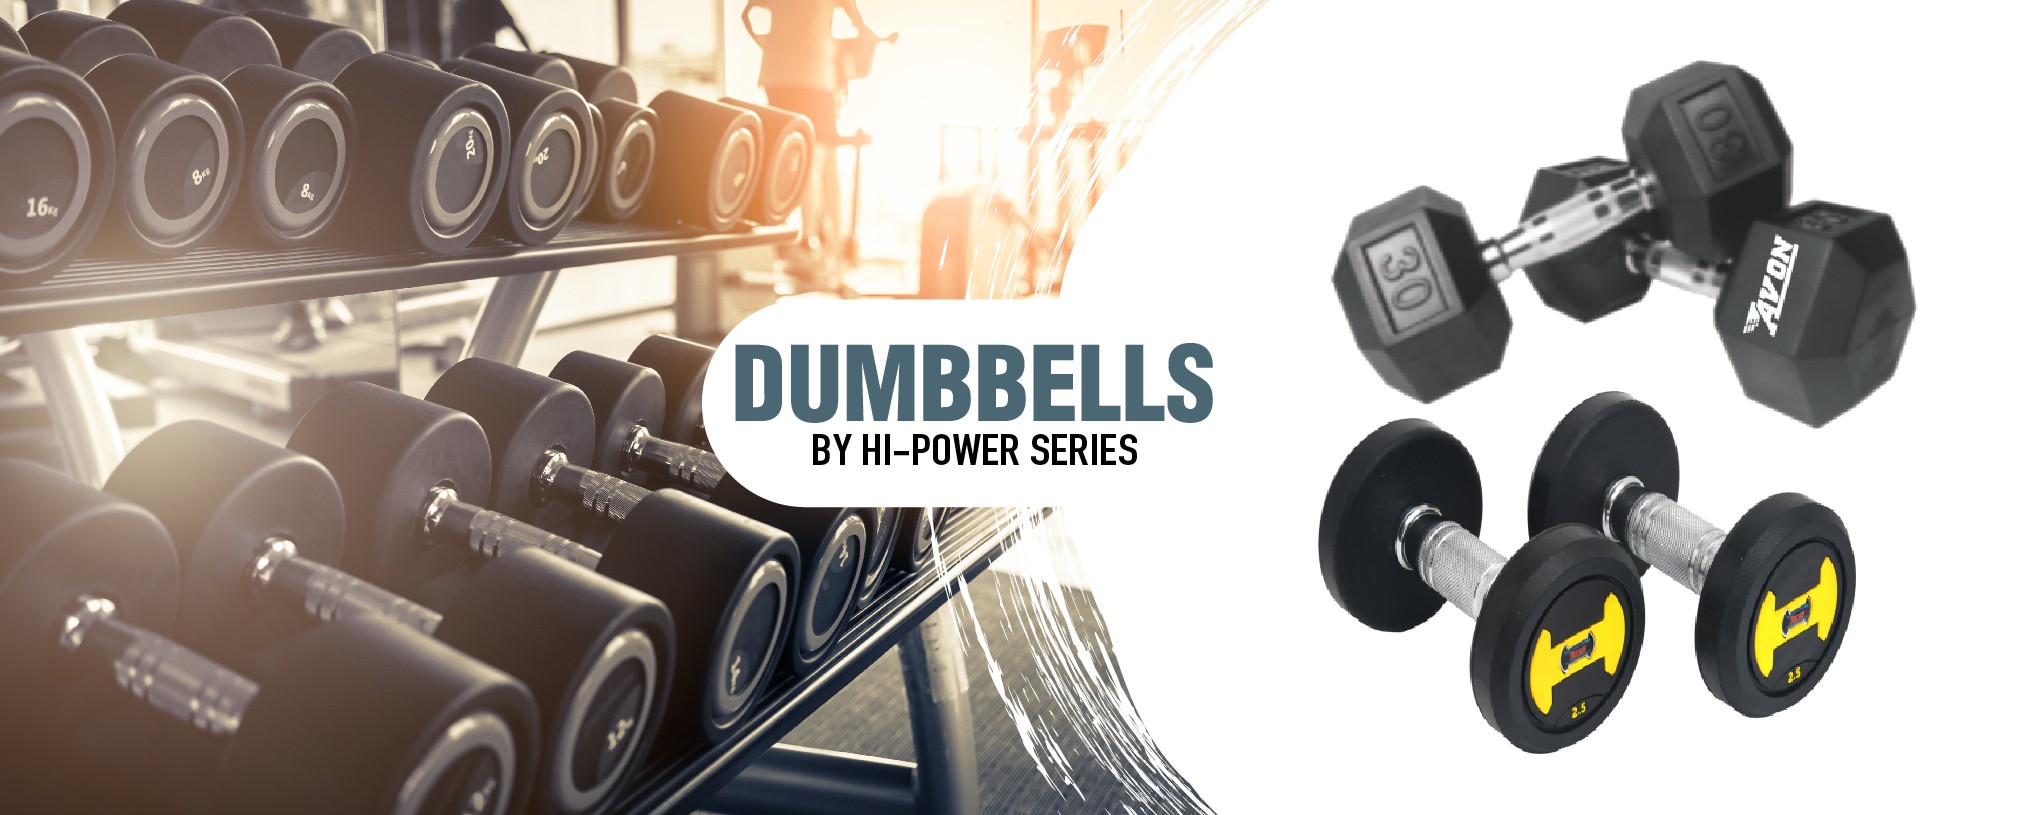 Which Dumbbell Exercises are Most Effective for Targeting the Chest Muscles? DumbbellsIeU3411-33-44